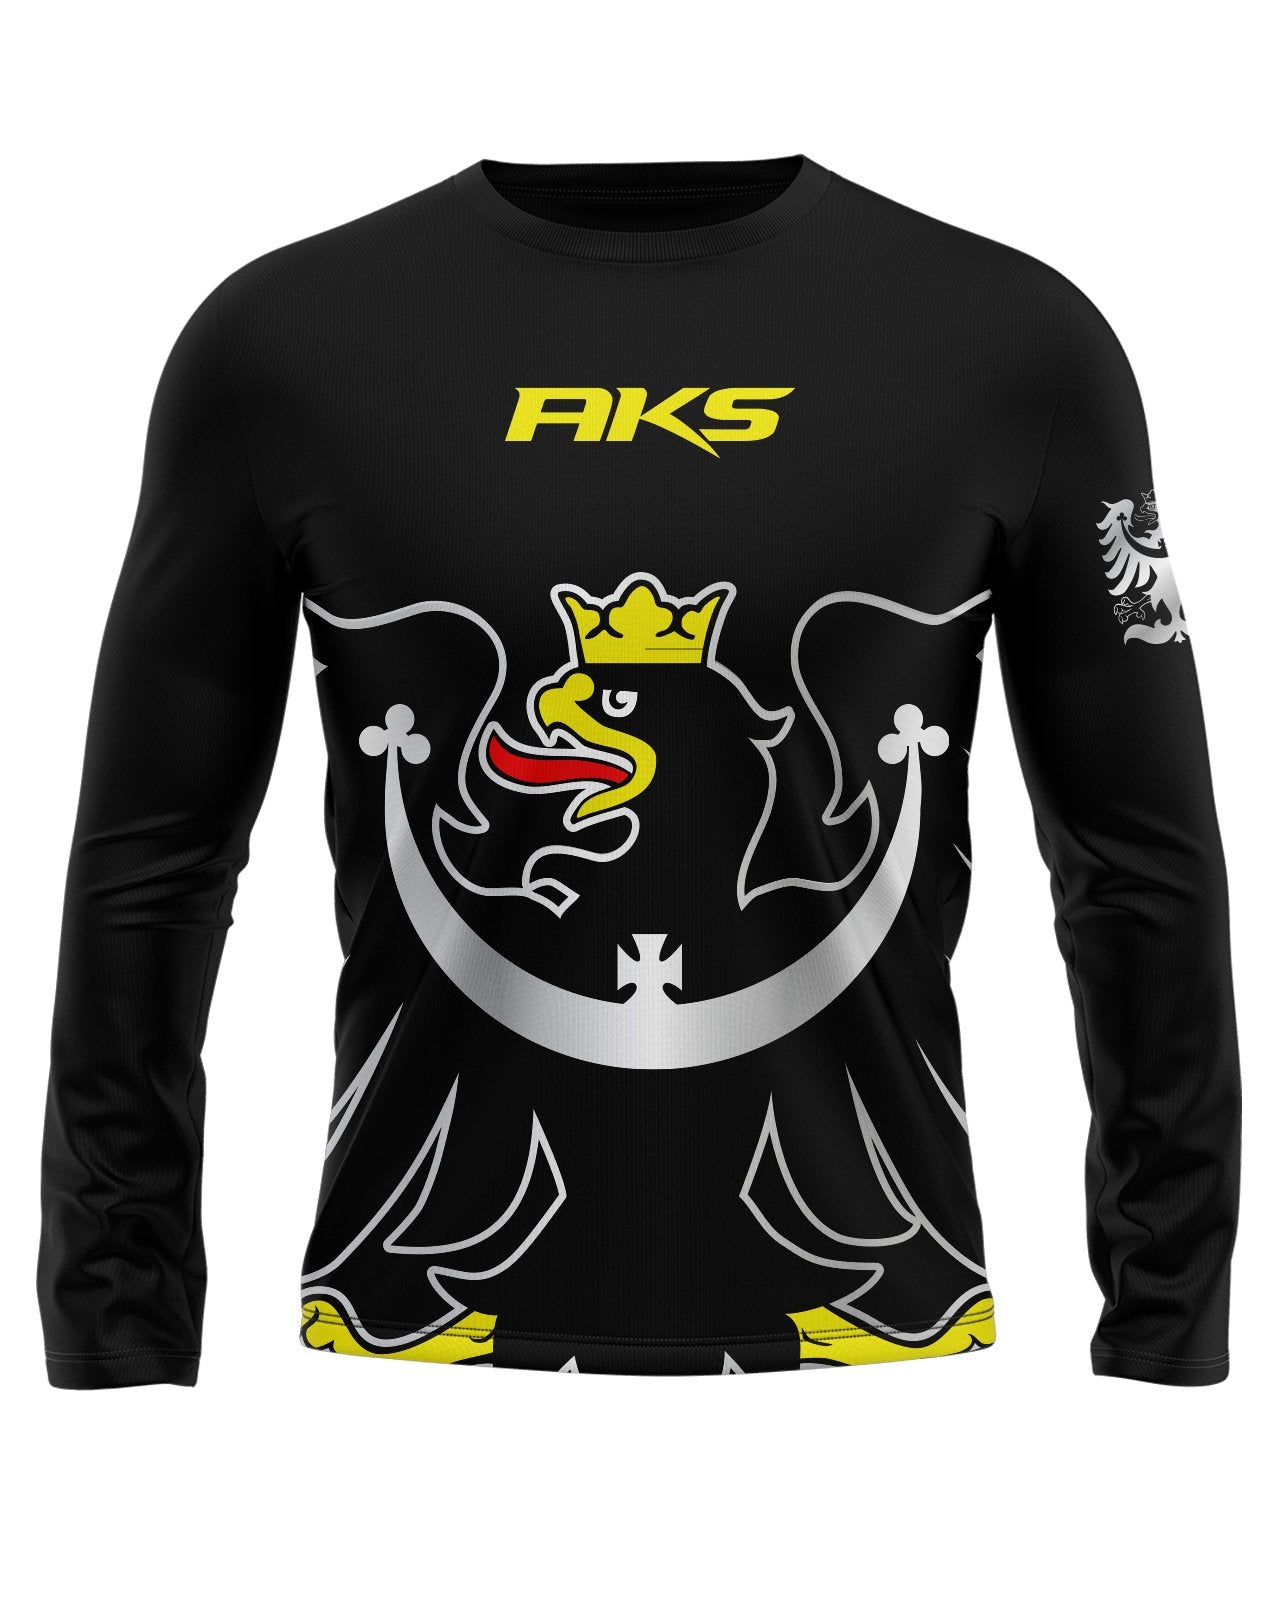 King Long-Sleeve T-shirt   Patriot Sports    Front  View. Printed all over in HD on premium fabric. Handmade in California.